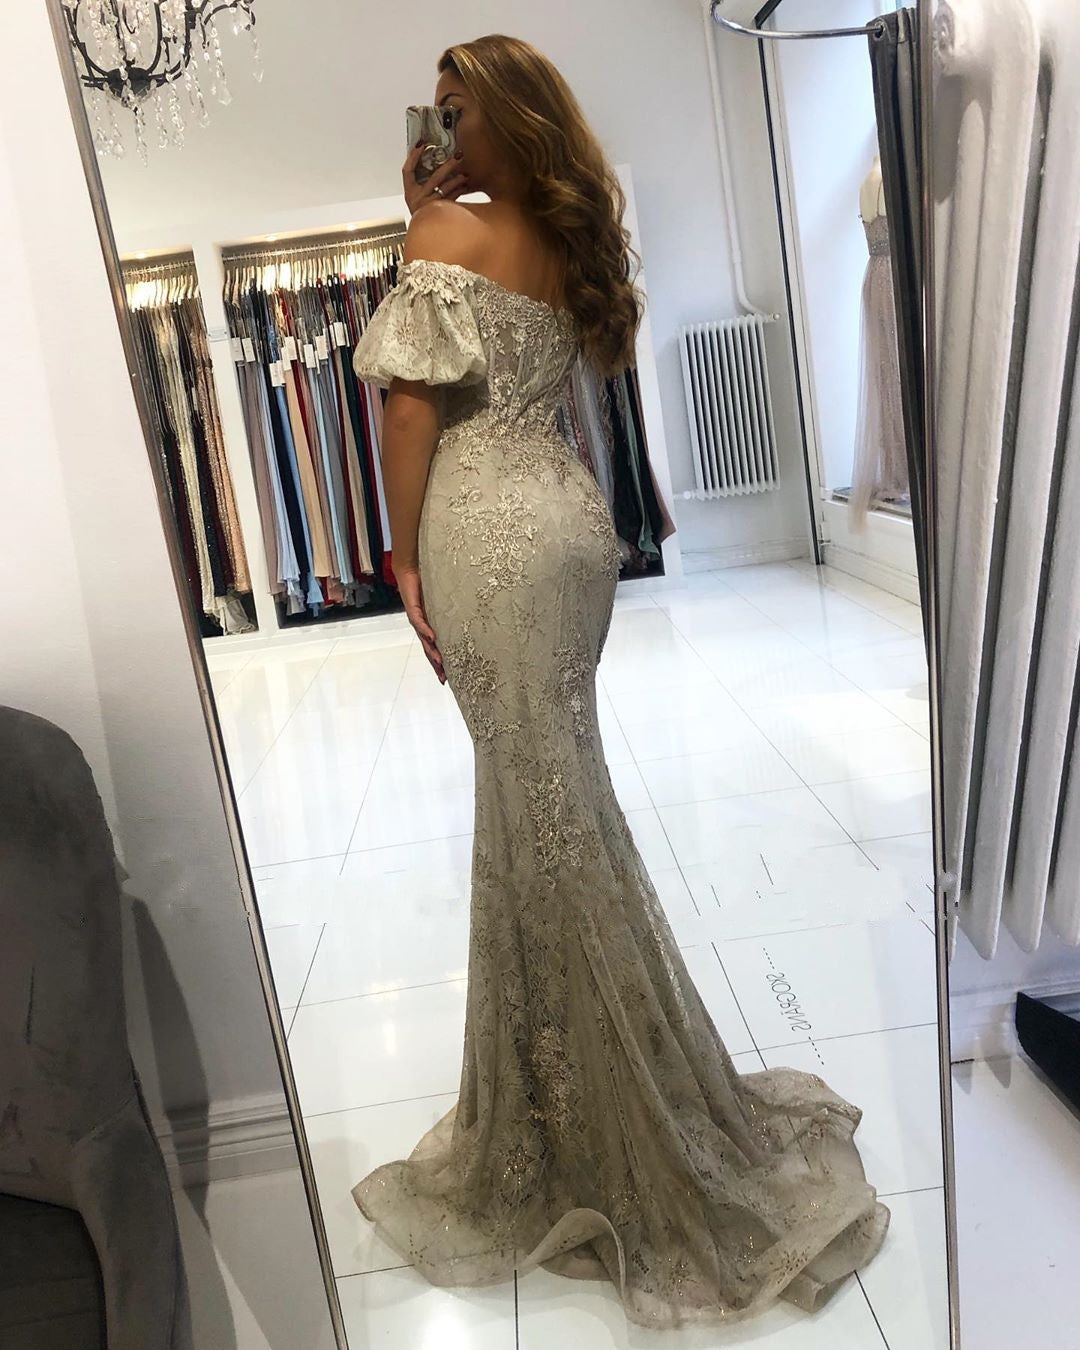 Stunning Long Off-the-shoulder Lace Mermaid Prom Dress with Puffy Sleeves-BIZTUNNEL